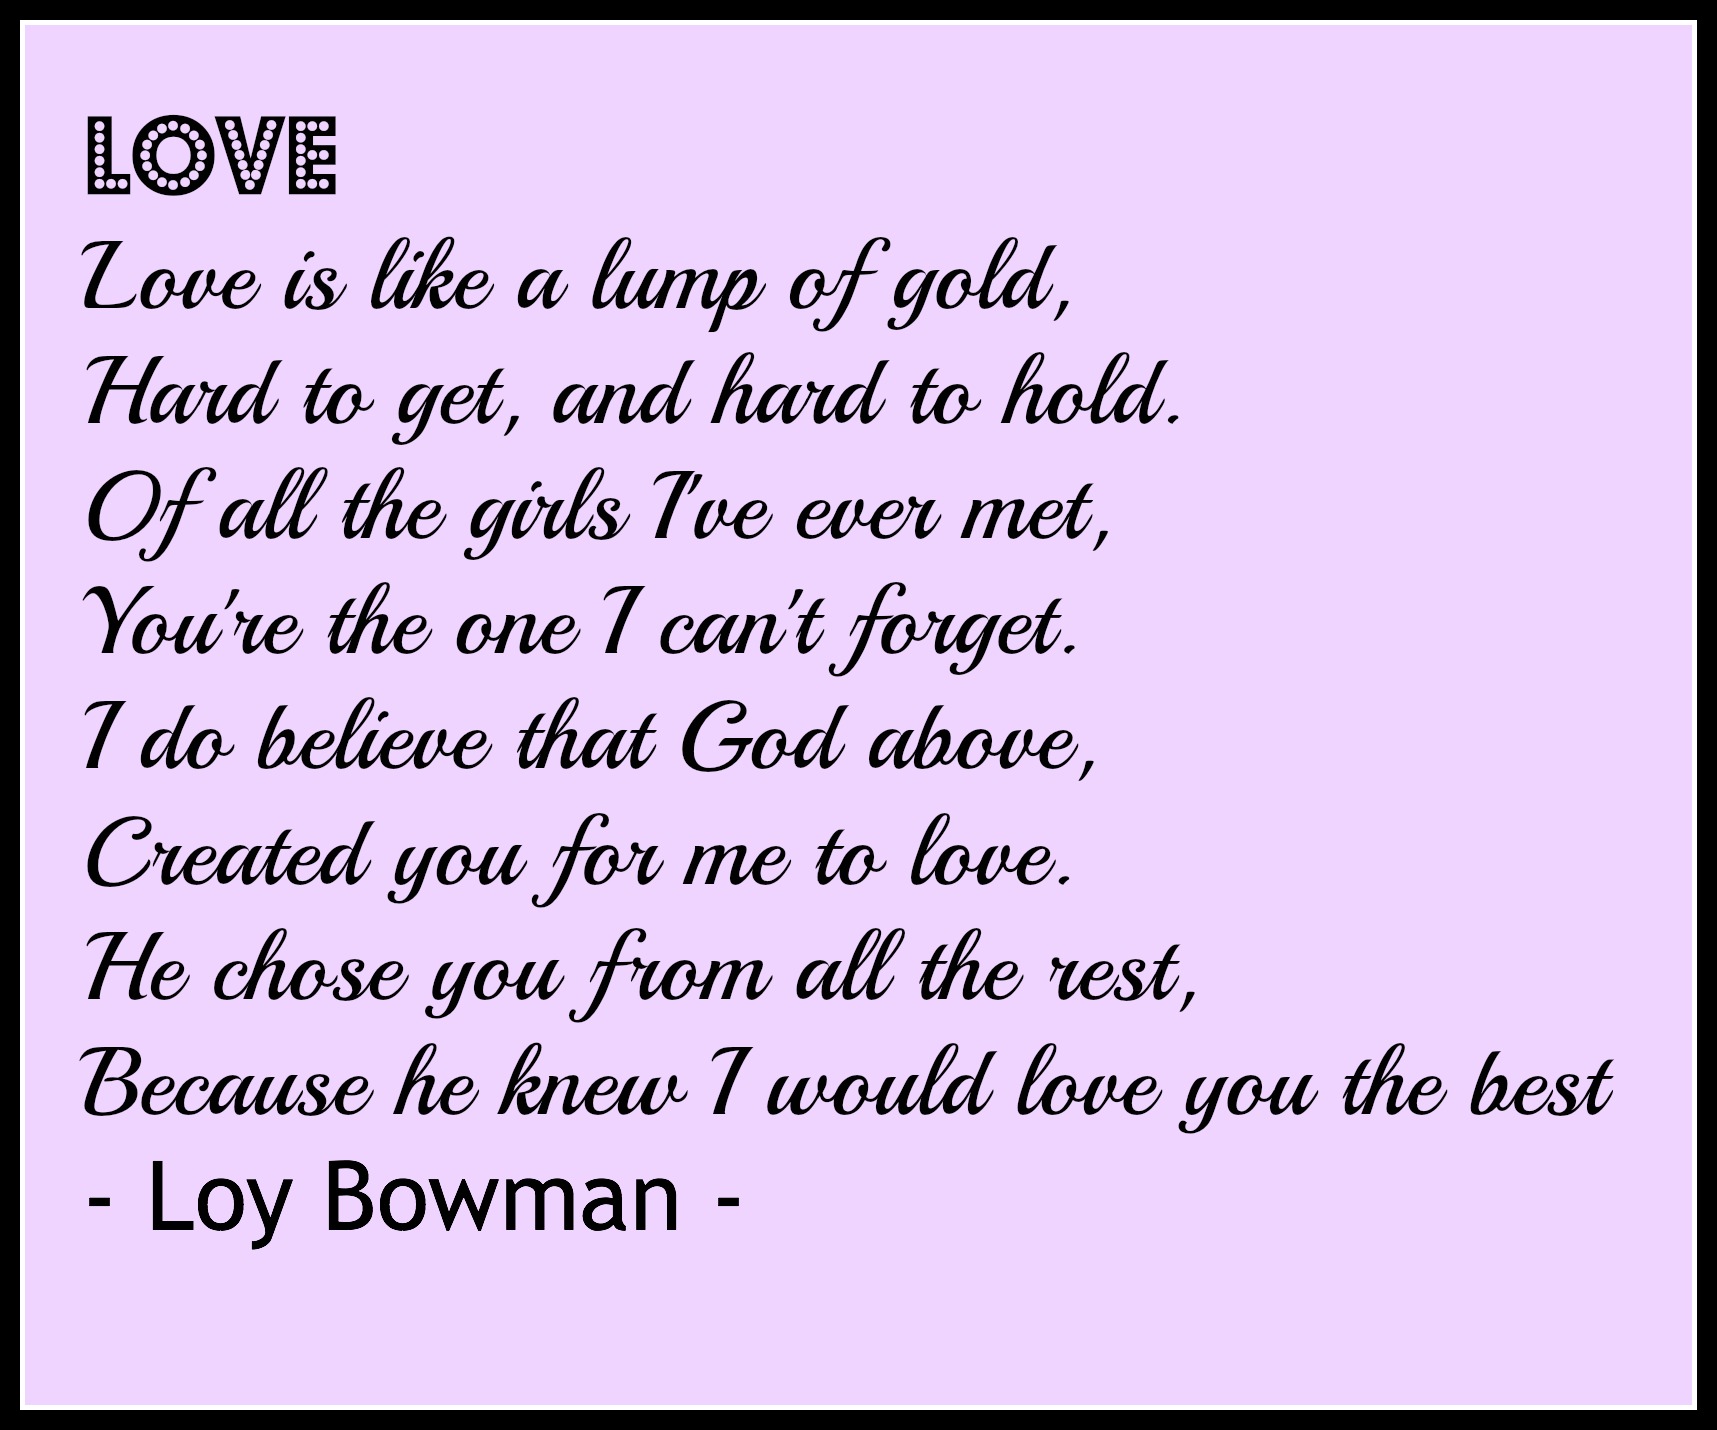 Love Poem for your wedding